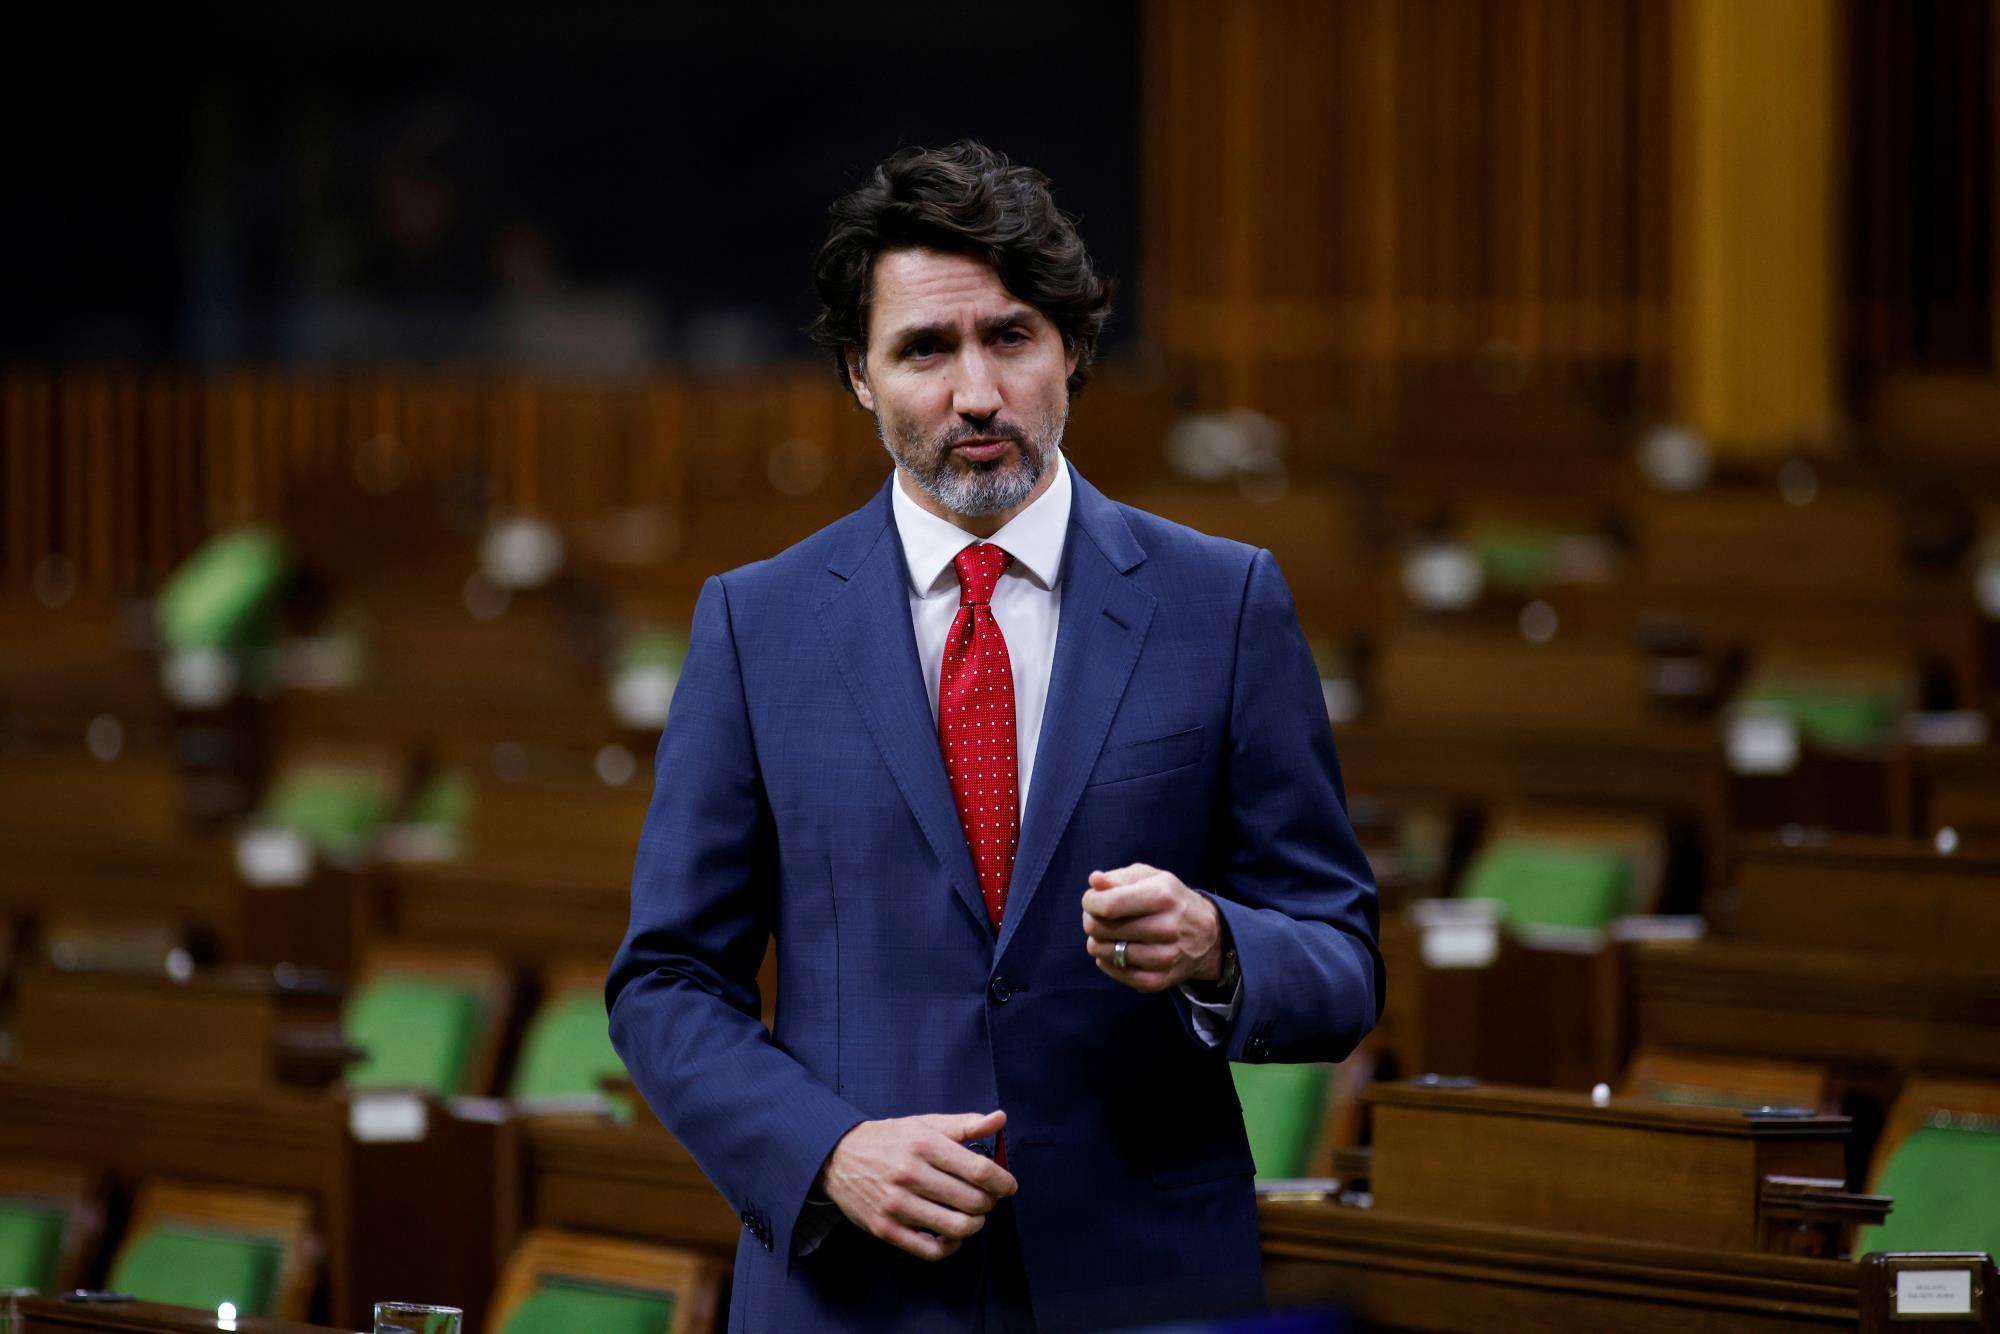 Canada's Prime Minister Justin Trudeau speaks during Question Period in the House of Commons on Parliament Hill in Ottawa, Ontario, Canada May 5, 2021. REUTERS/Blair Gable/File Photo